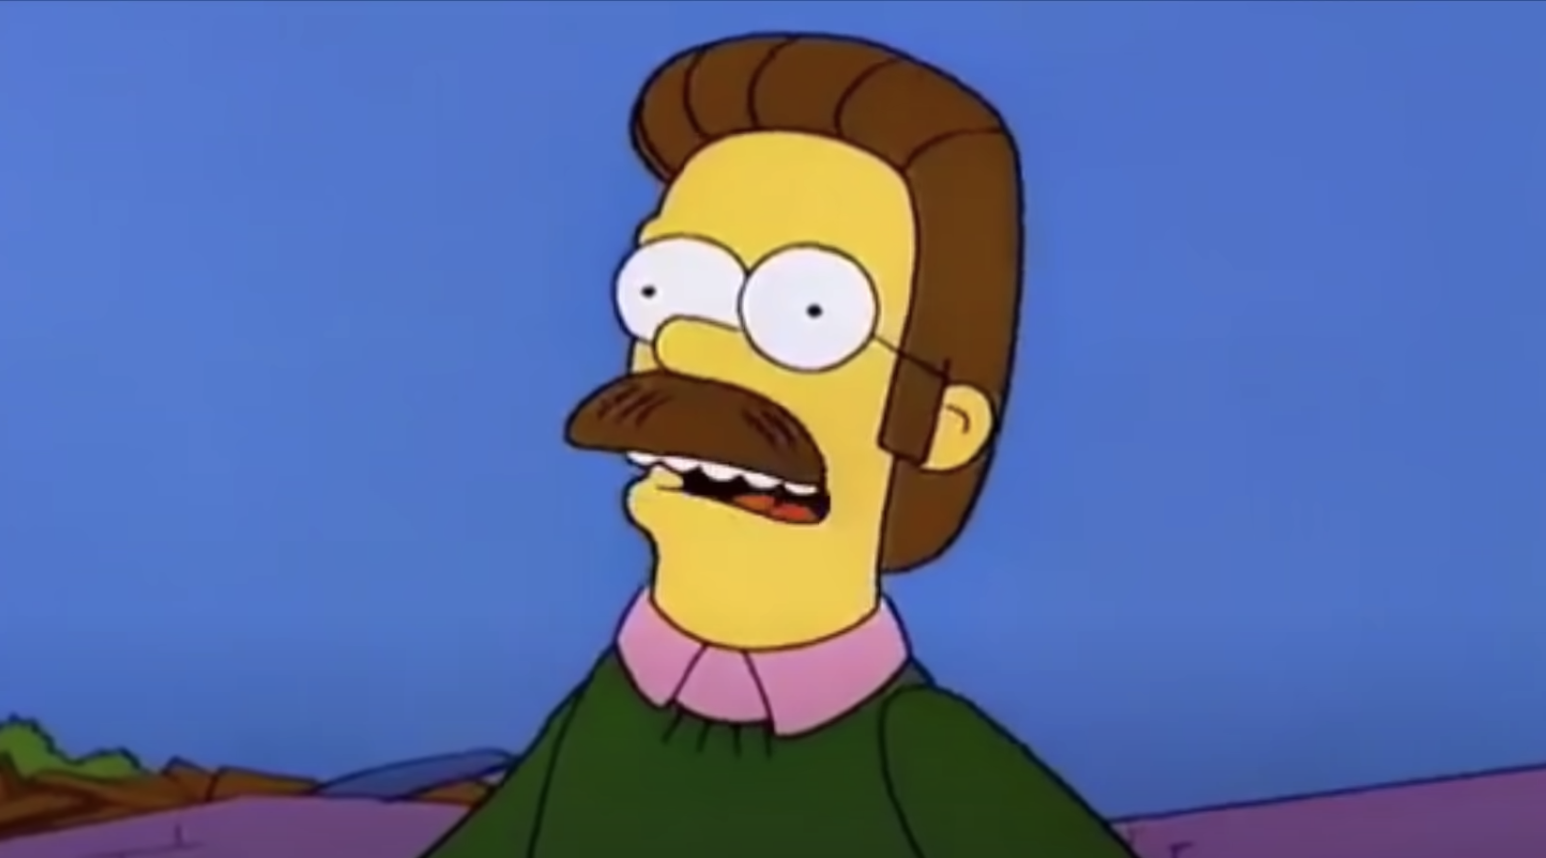 Ned Flanders from the Simpsons